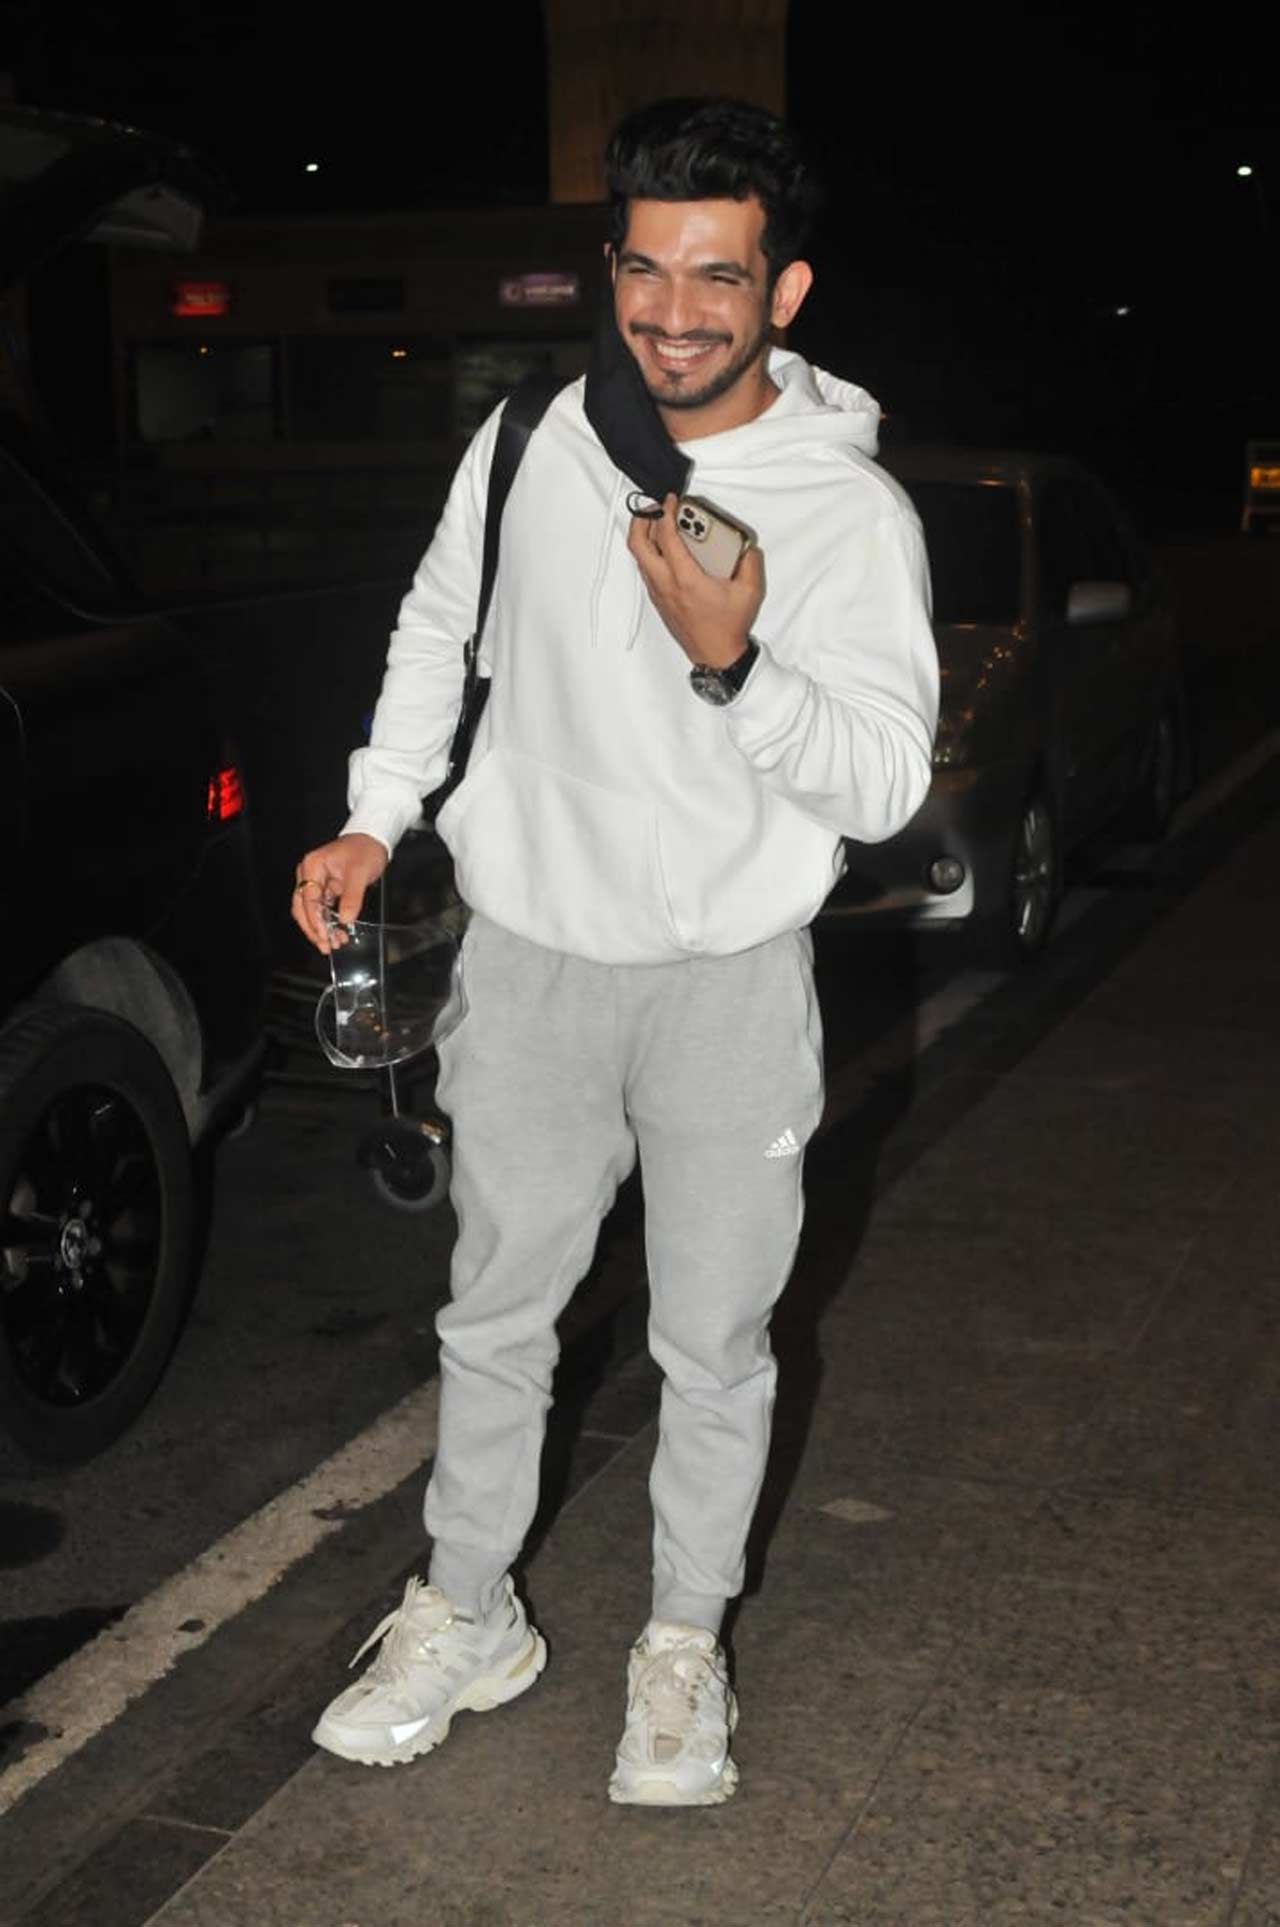  Arjun Bijlani, who left for Cape Town to the shoot of the stunt-based reality show Khatron Ke Khiladi 11, shared in a media interaction, 